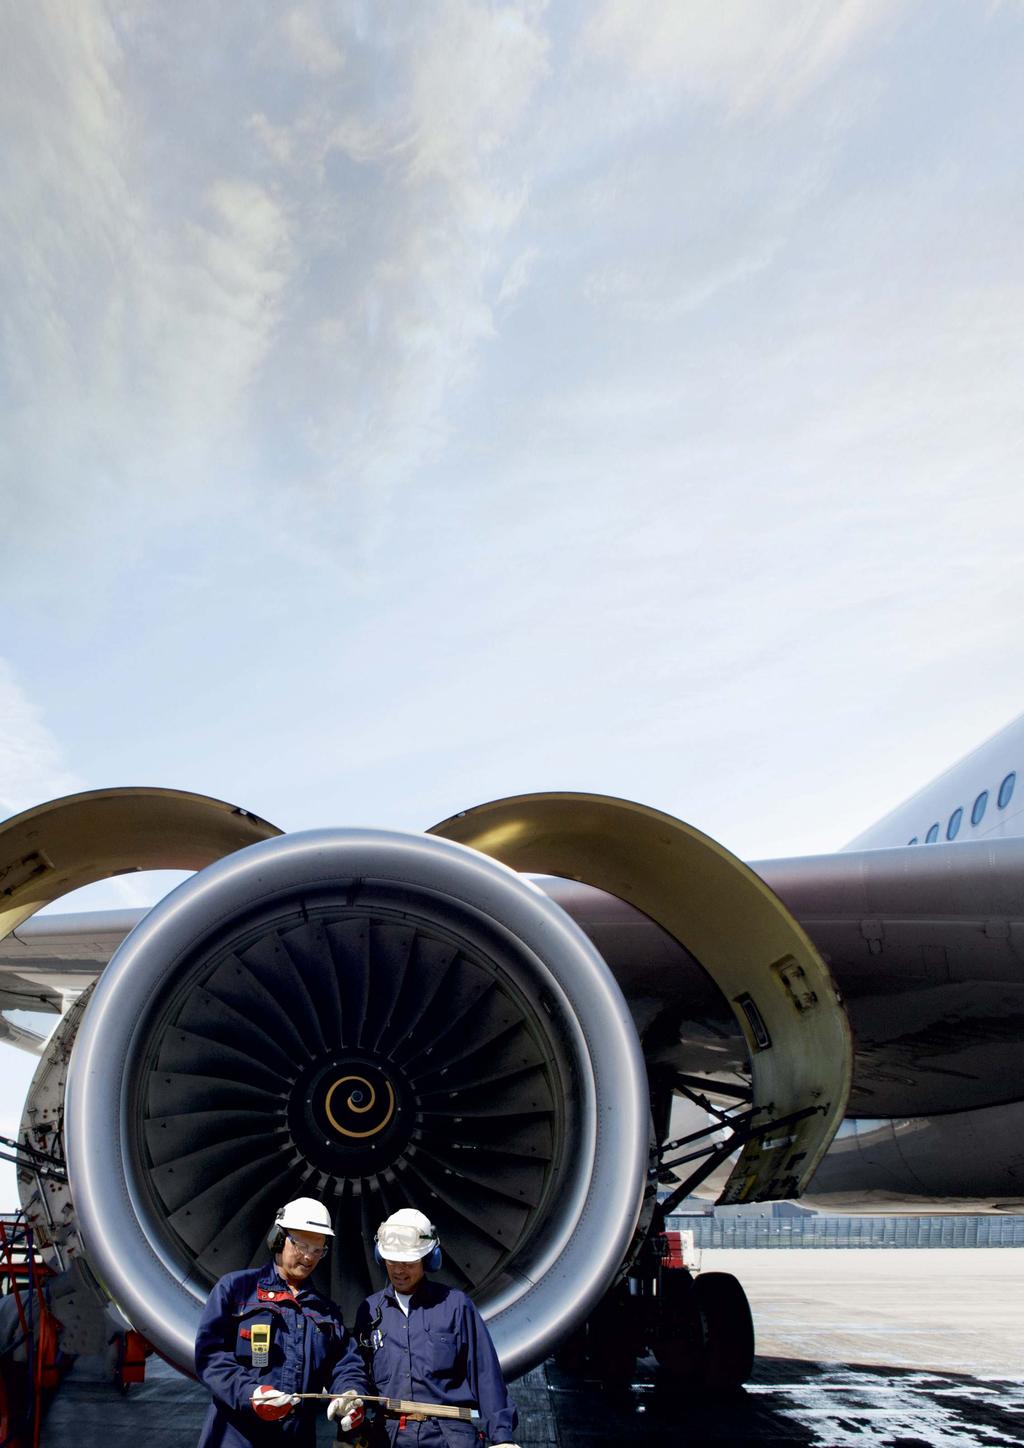 State of the industry Airlines and MRO providers face formidable challenges in the form of uncertainty in fuel prices, demand, material costs and availability of skilled labor.